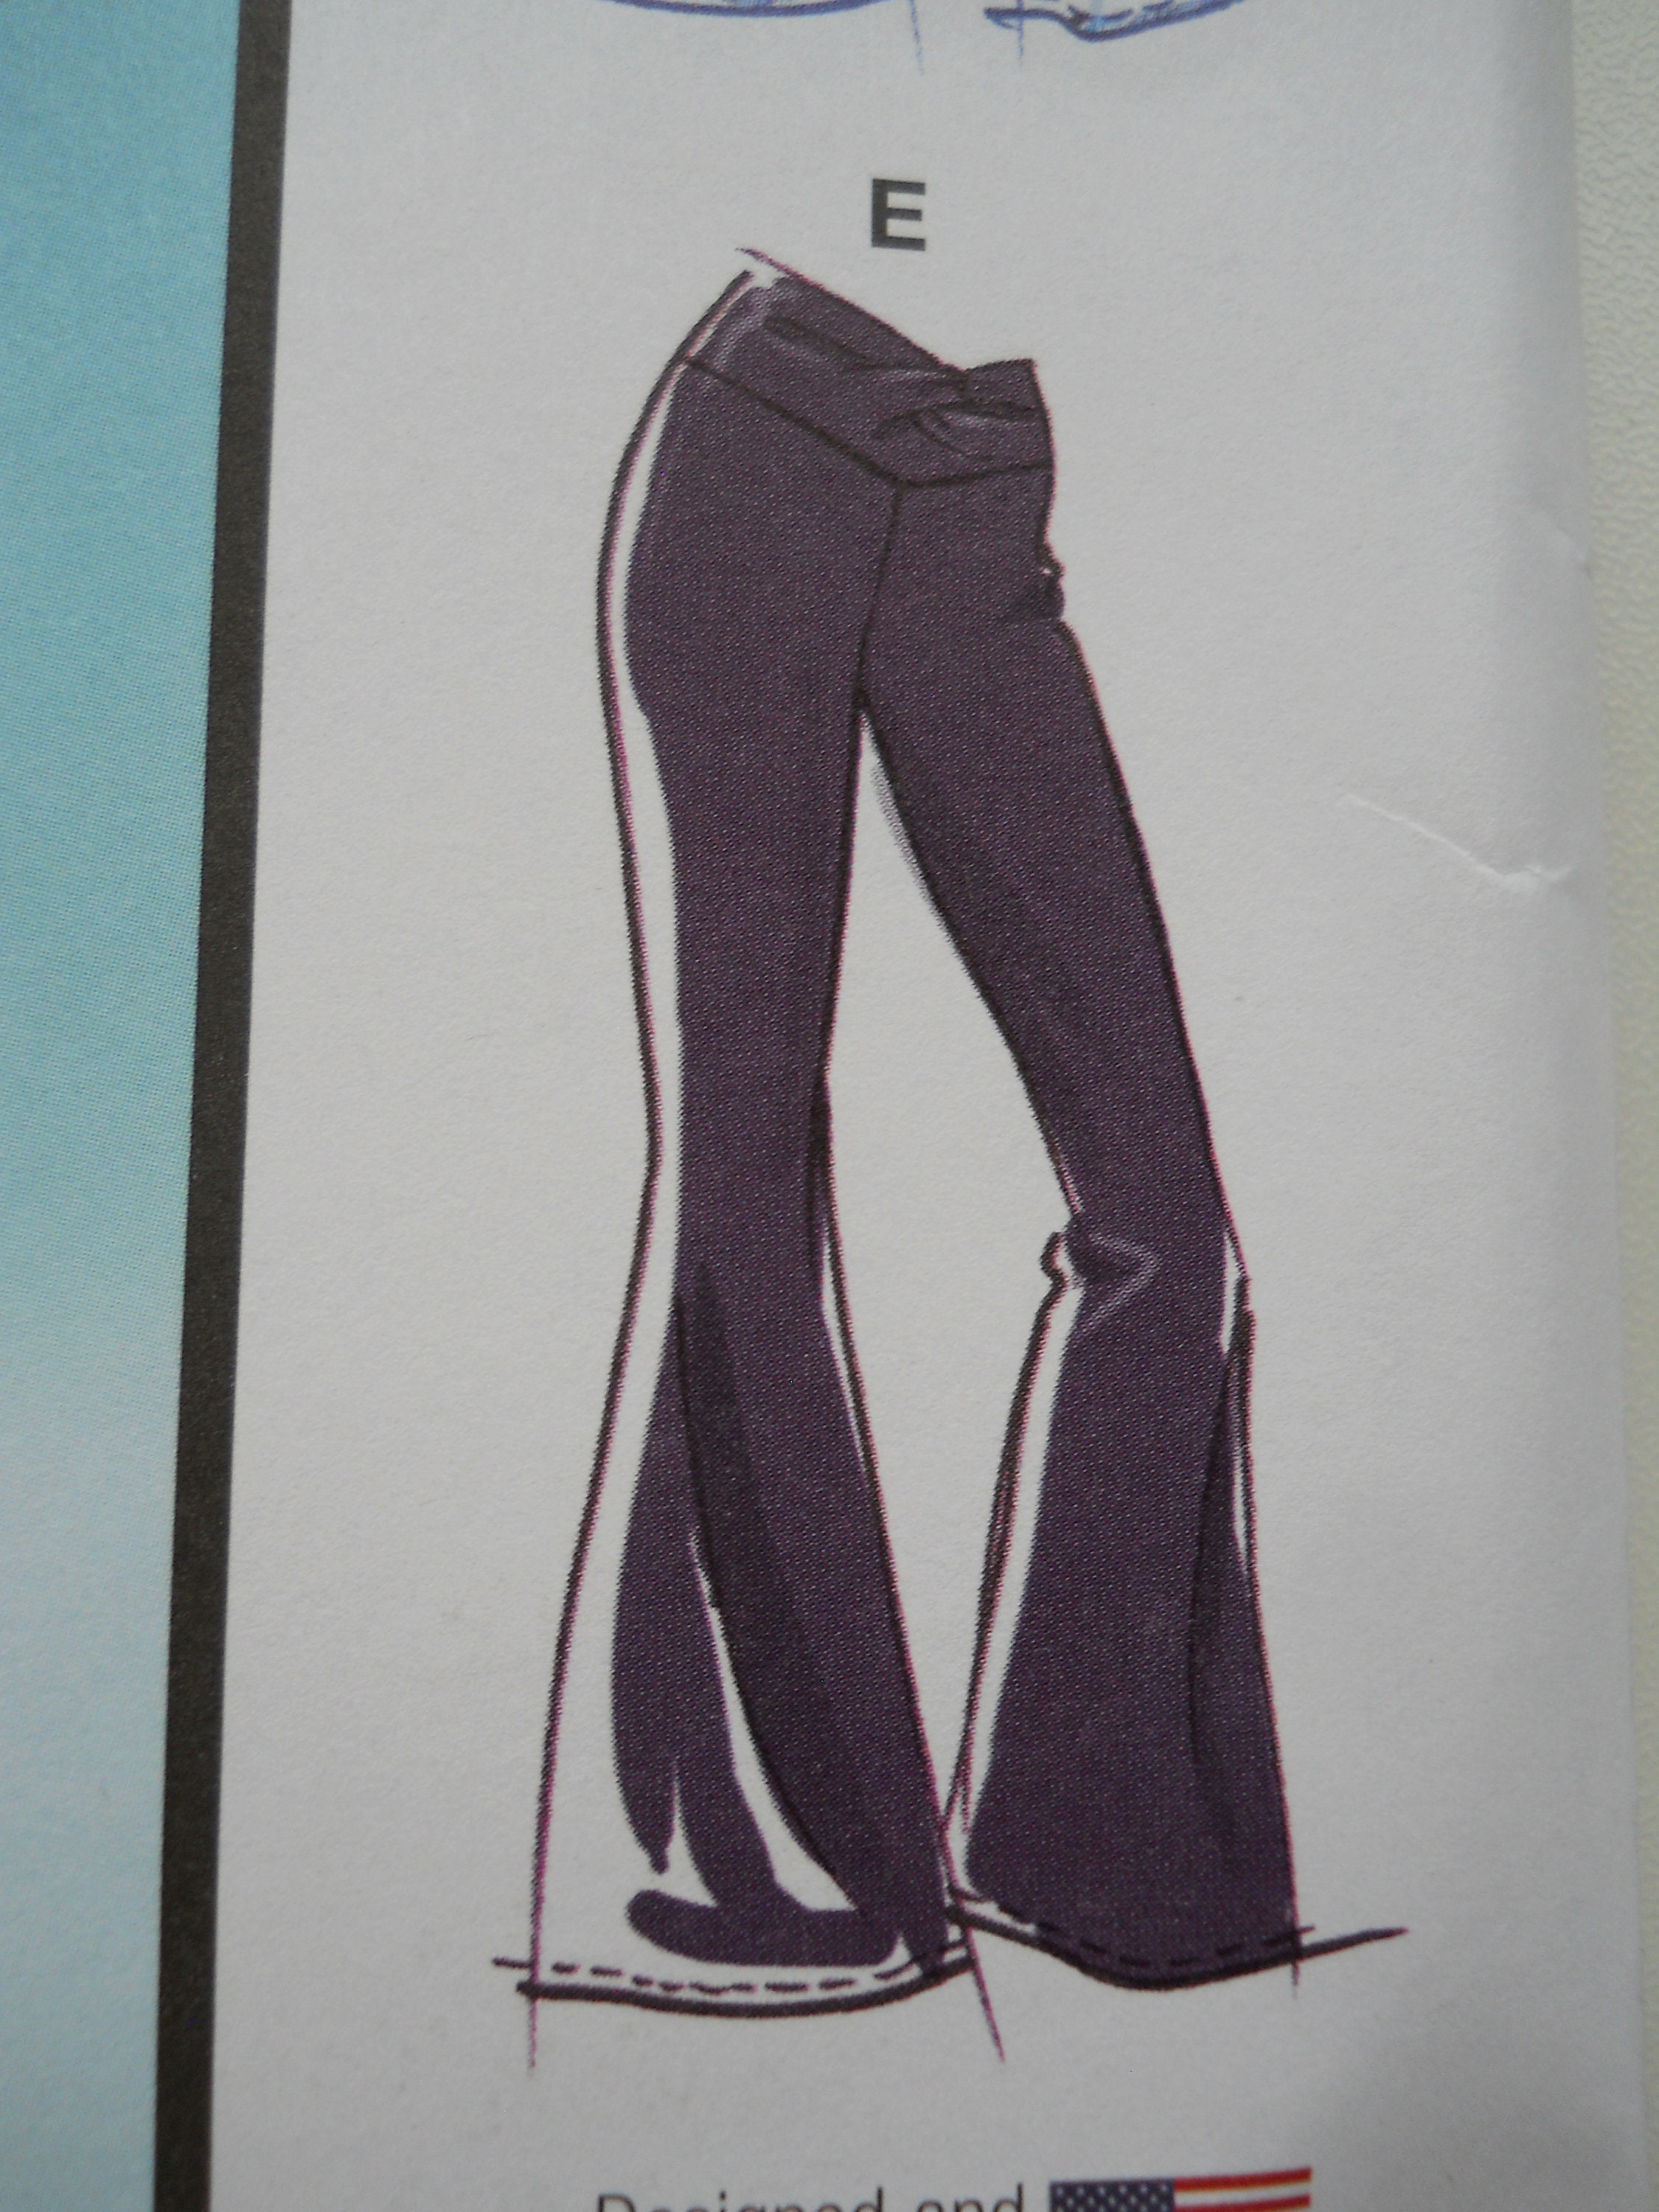 Athletic Wear Mccall's M8368 A XS-XL New Sewing Pattern, Crop Top